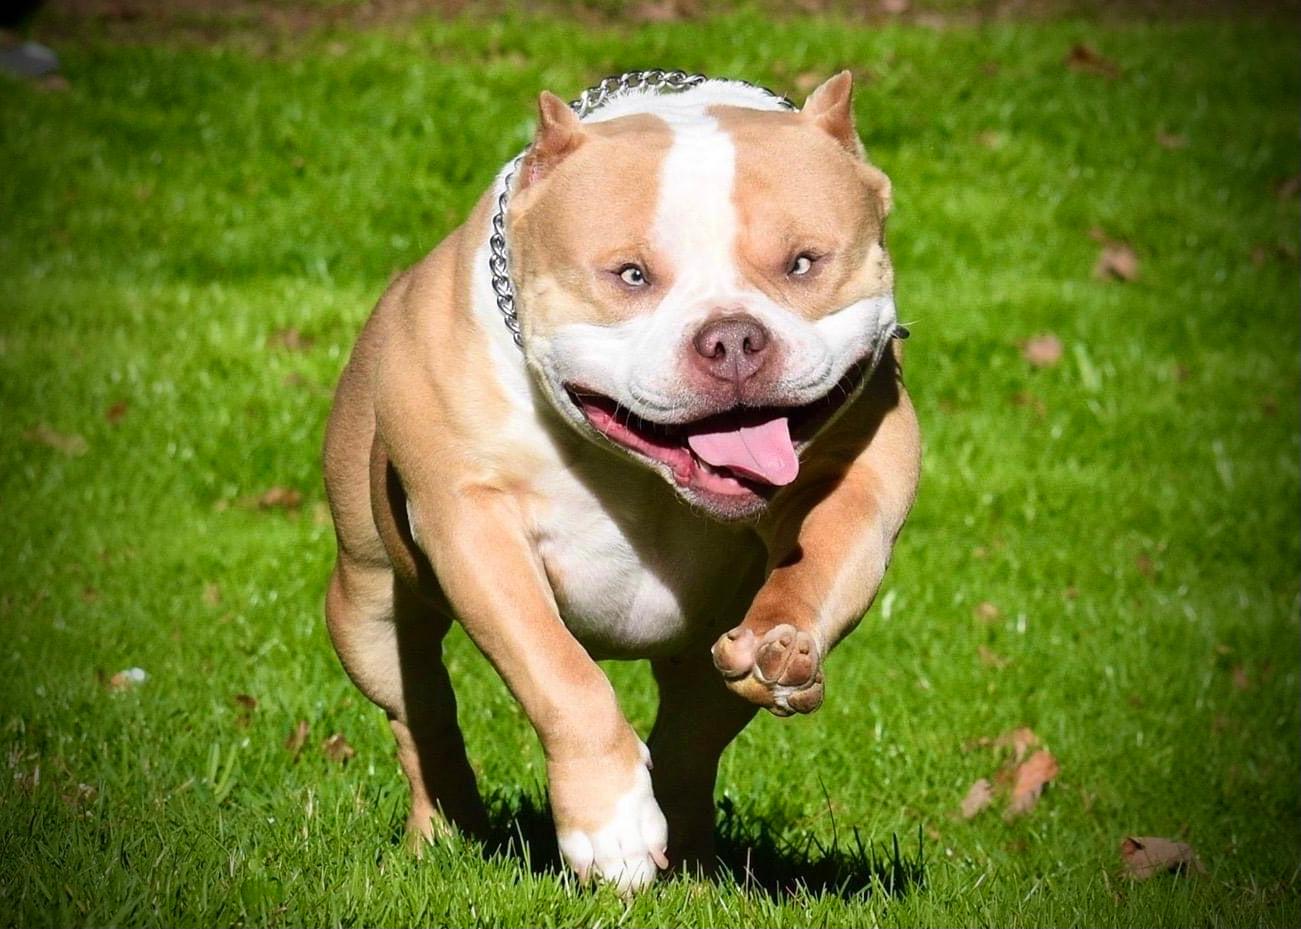 top american bully breeders 2022, best bloodlines, top studs, bully, stud service, puppies for sale, venomline, phoking style, muscletone, louis v line